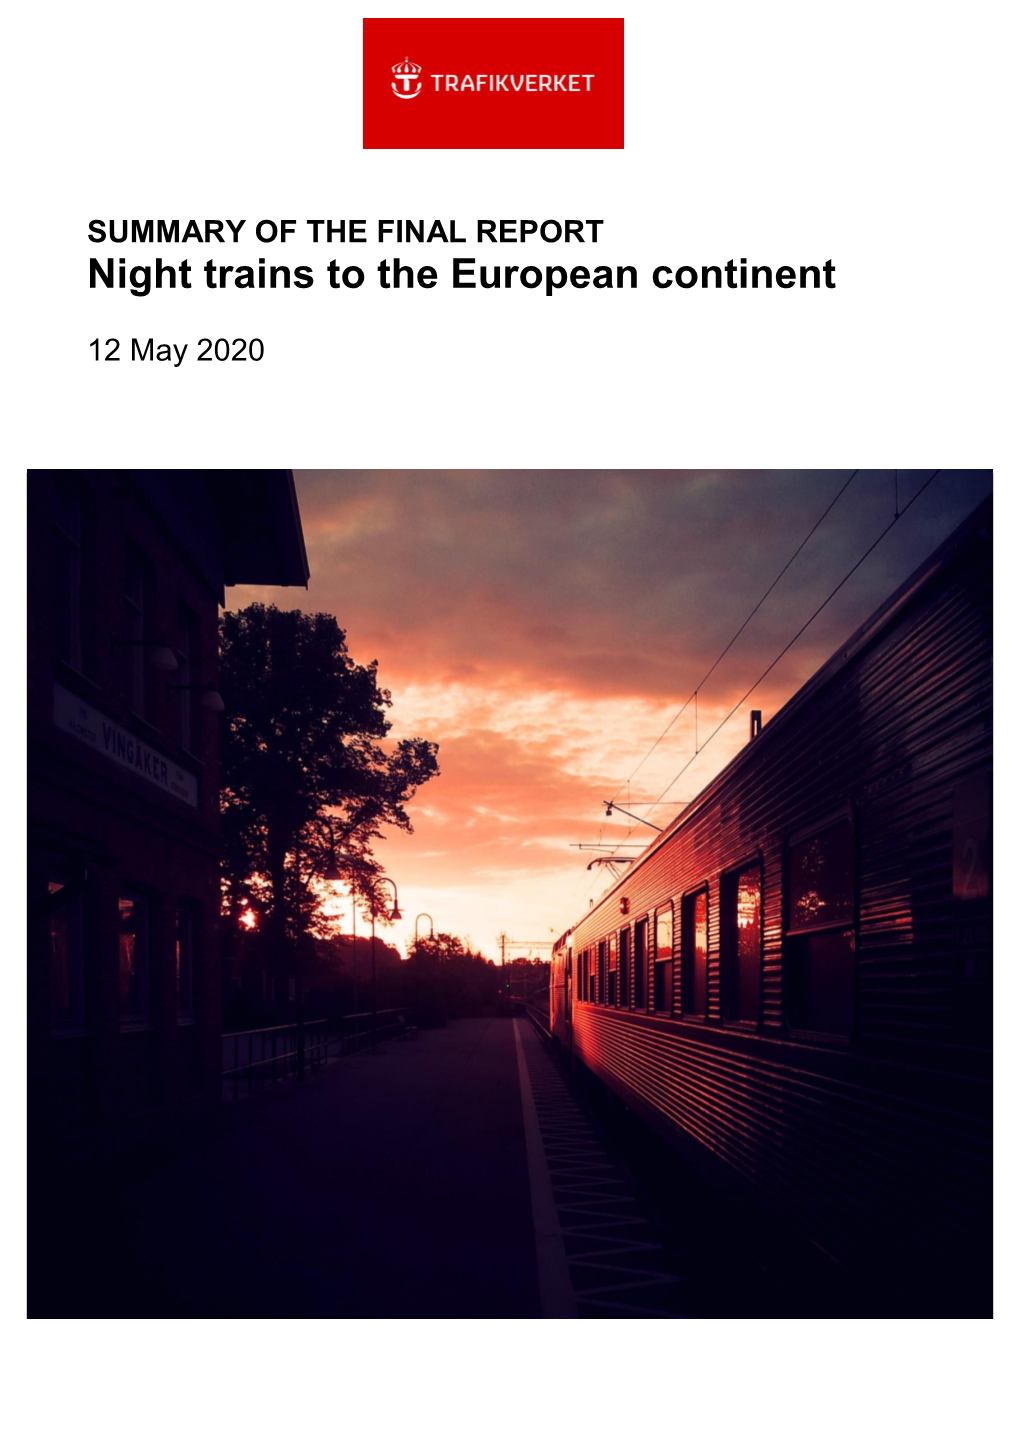 SUMMARY of the FINAL REPORT Night Trains to The